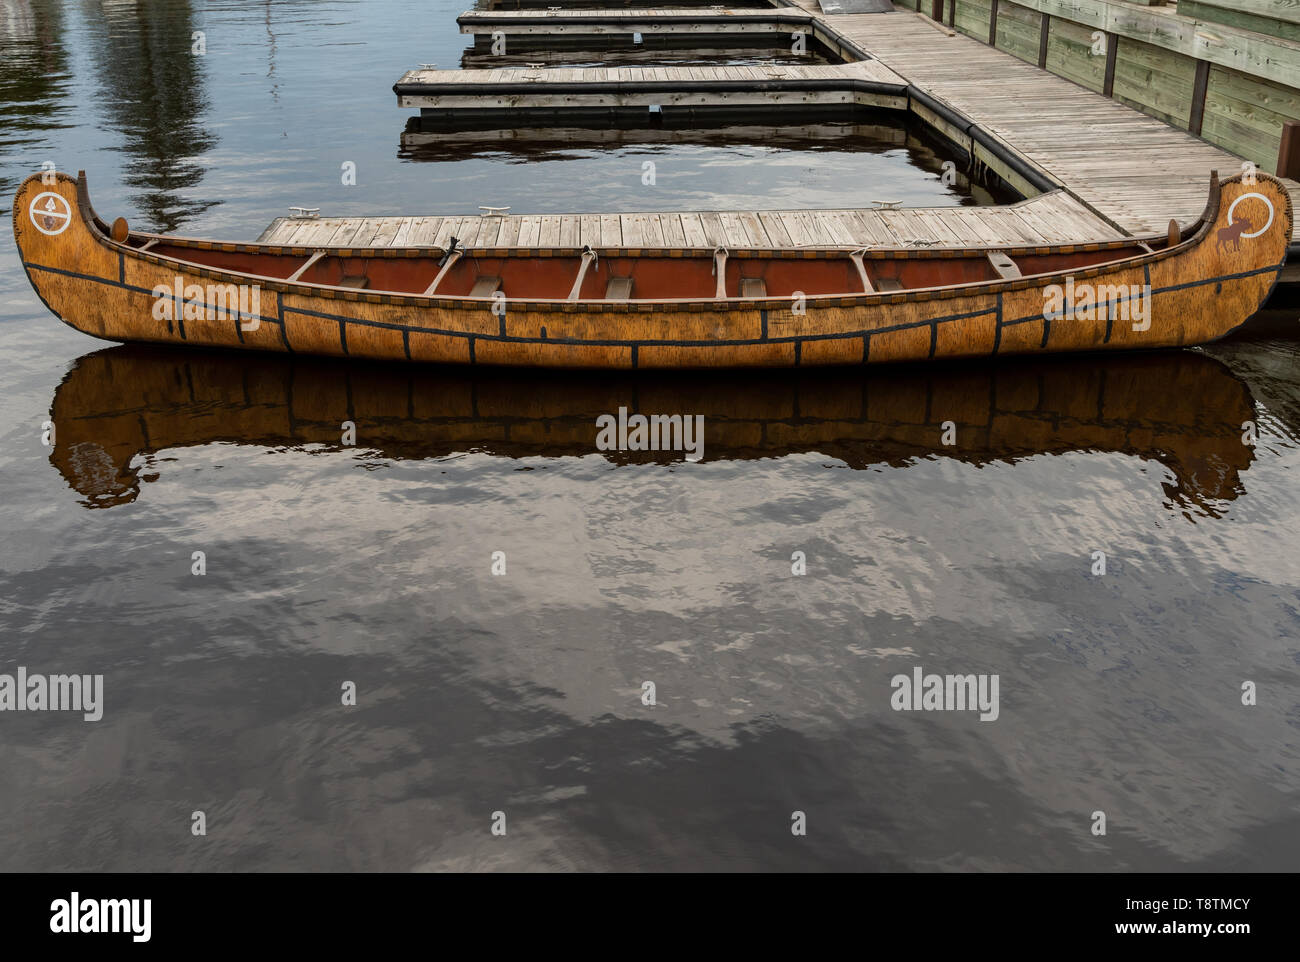 Antique Canoe at Voyageurs National Park resting on dock Stock Photo